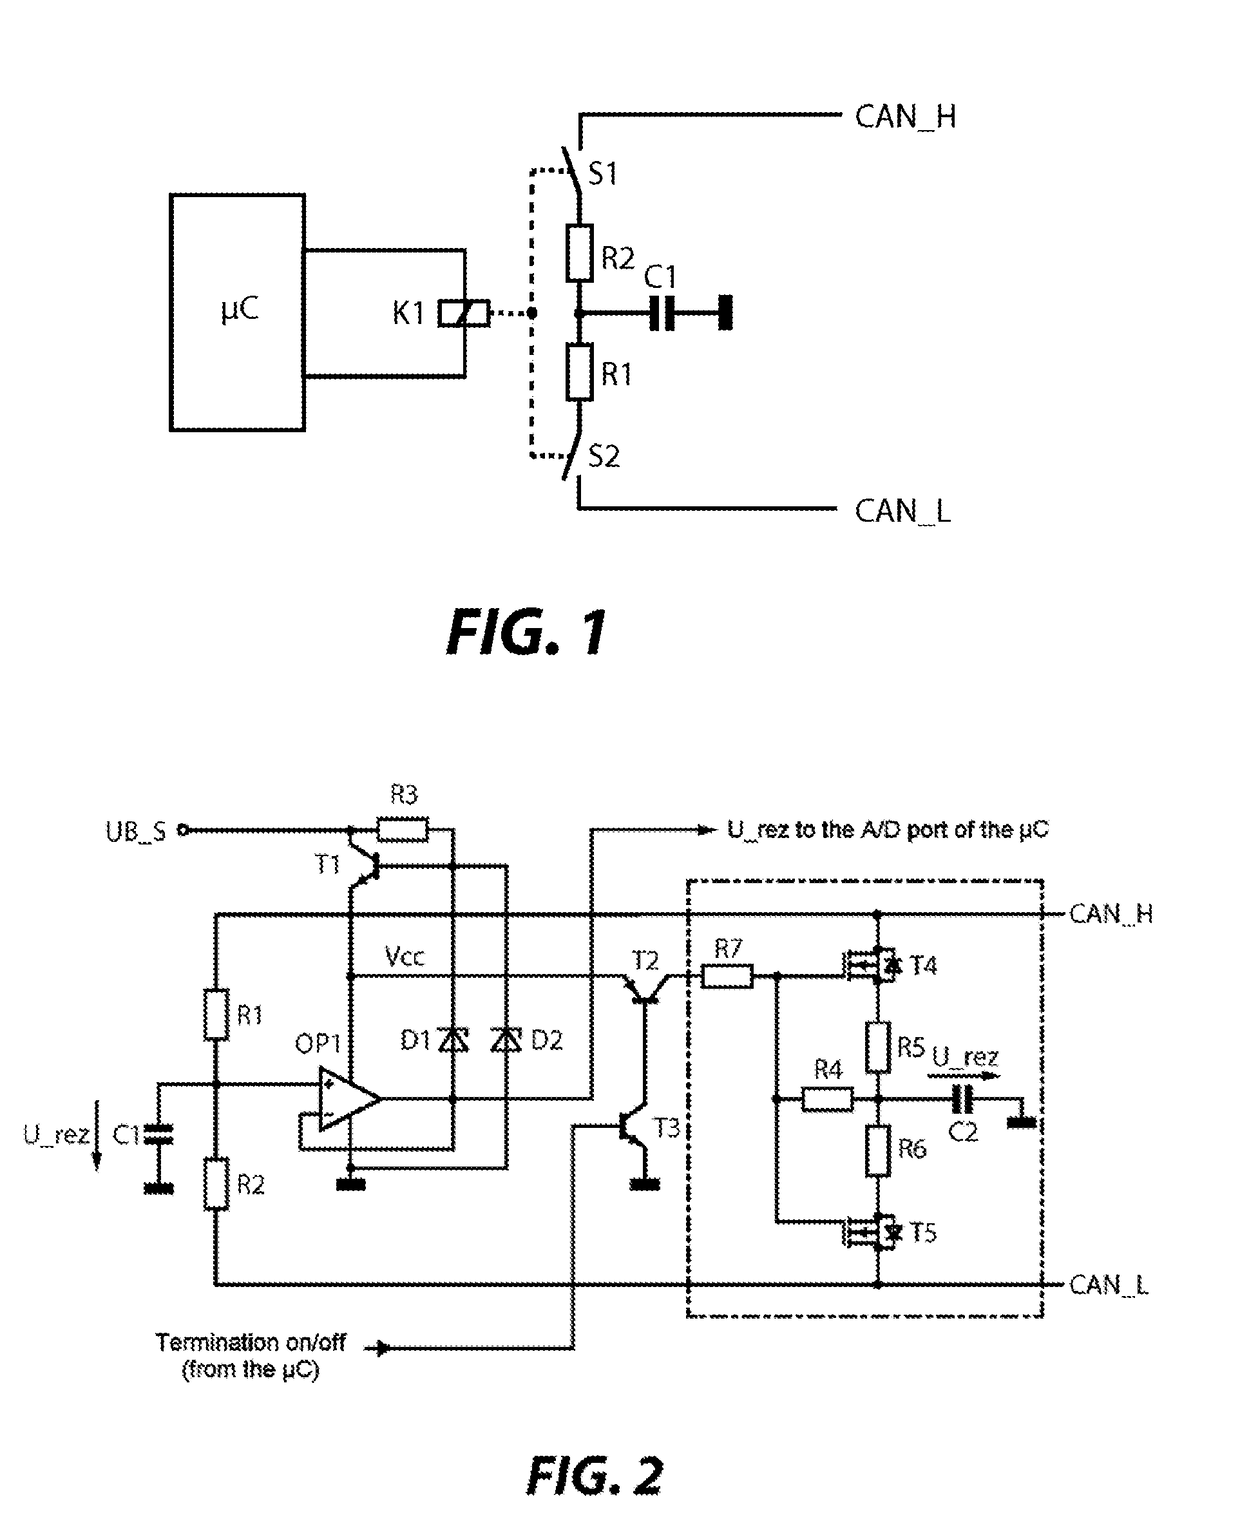 Circuit assembly for a switchable line termination of a serial bus